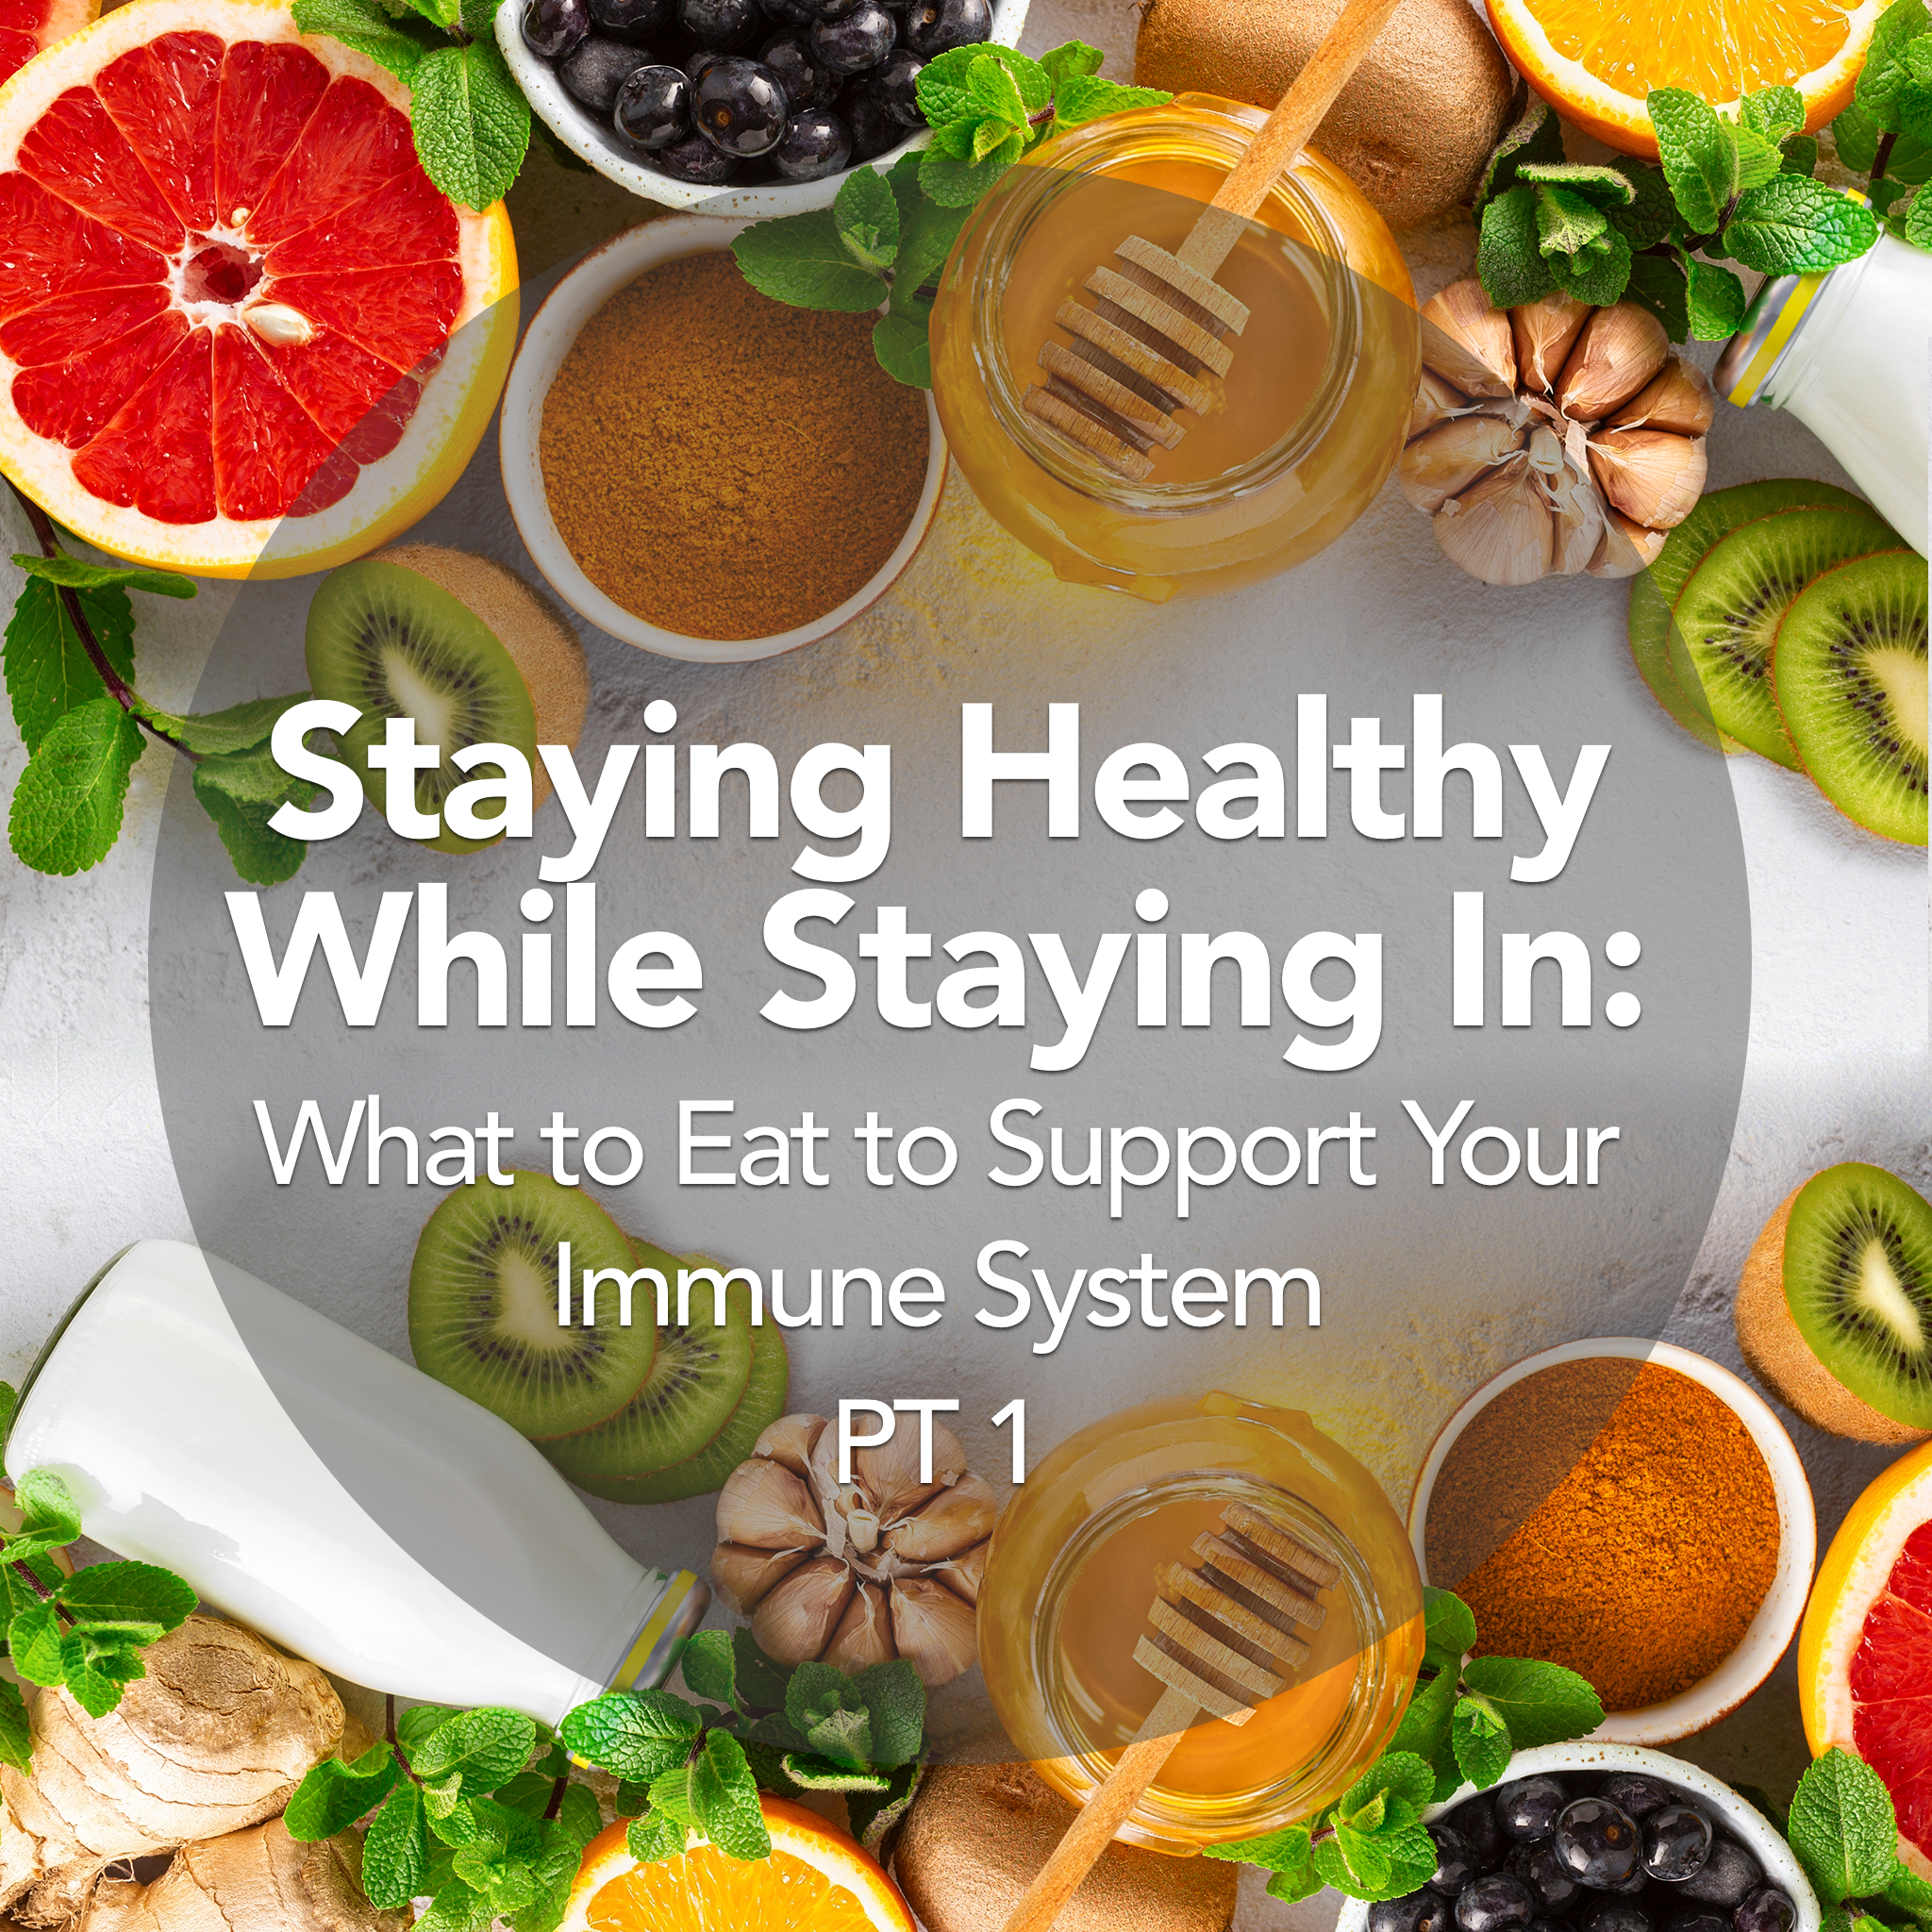 Stay In, Stay Healthy: What to Eat to Support Your Immune System PT 1